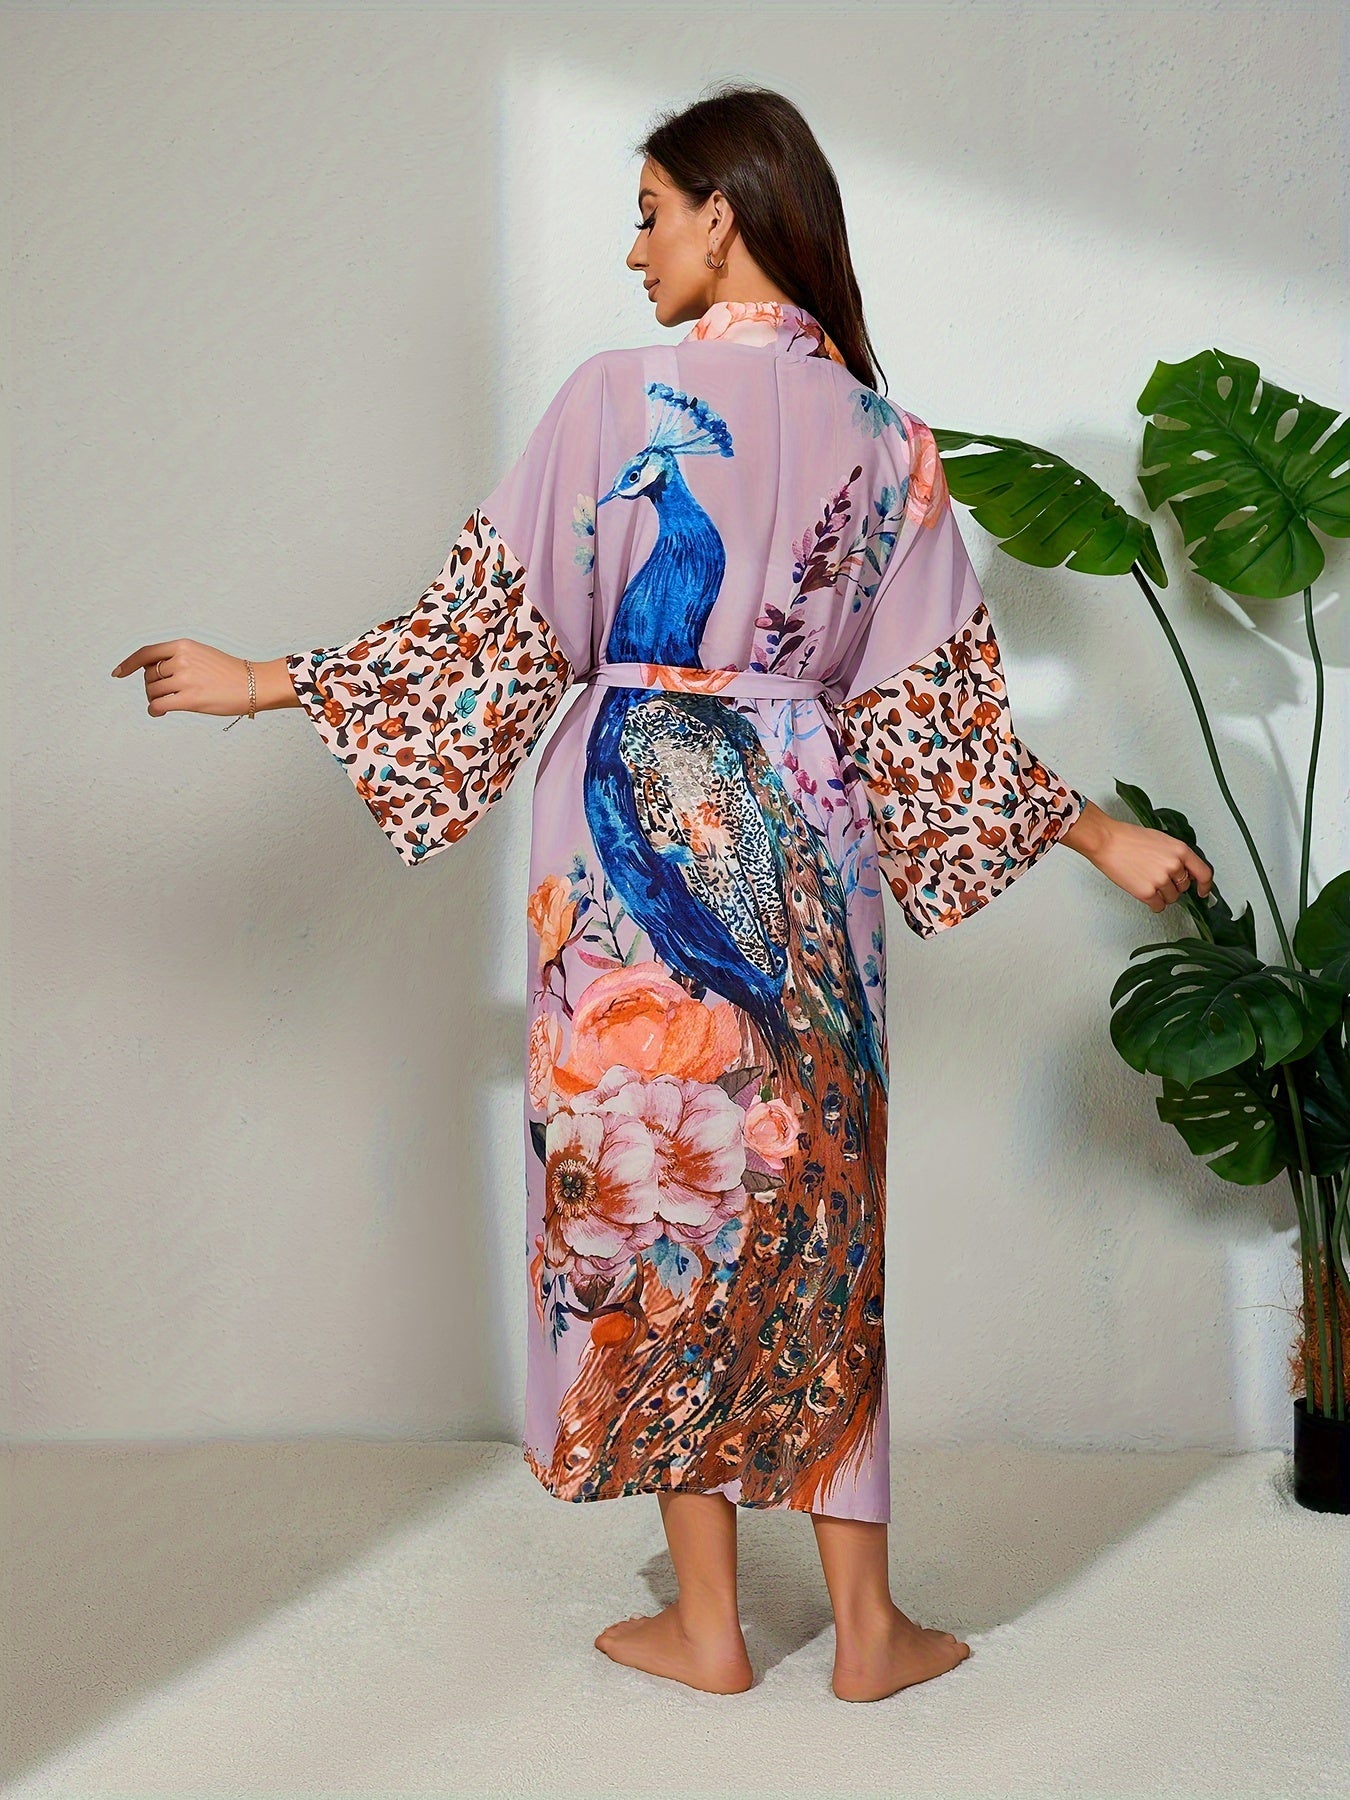 A woman stands with her back to the camera, wearing a Maramalive™ Bohemian Style Women's Peacock Print Beach Cover-Up With Belt, Long Sleeves Loose Fit Vacation Kimono. The boho tunic-style robe contrasts beautifully with the light-colored wall, as she stands near a tall potted plant.